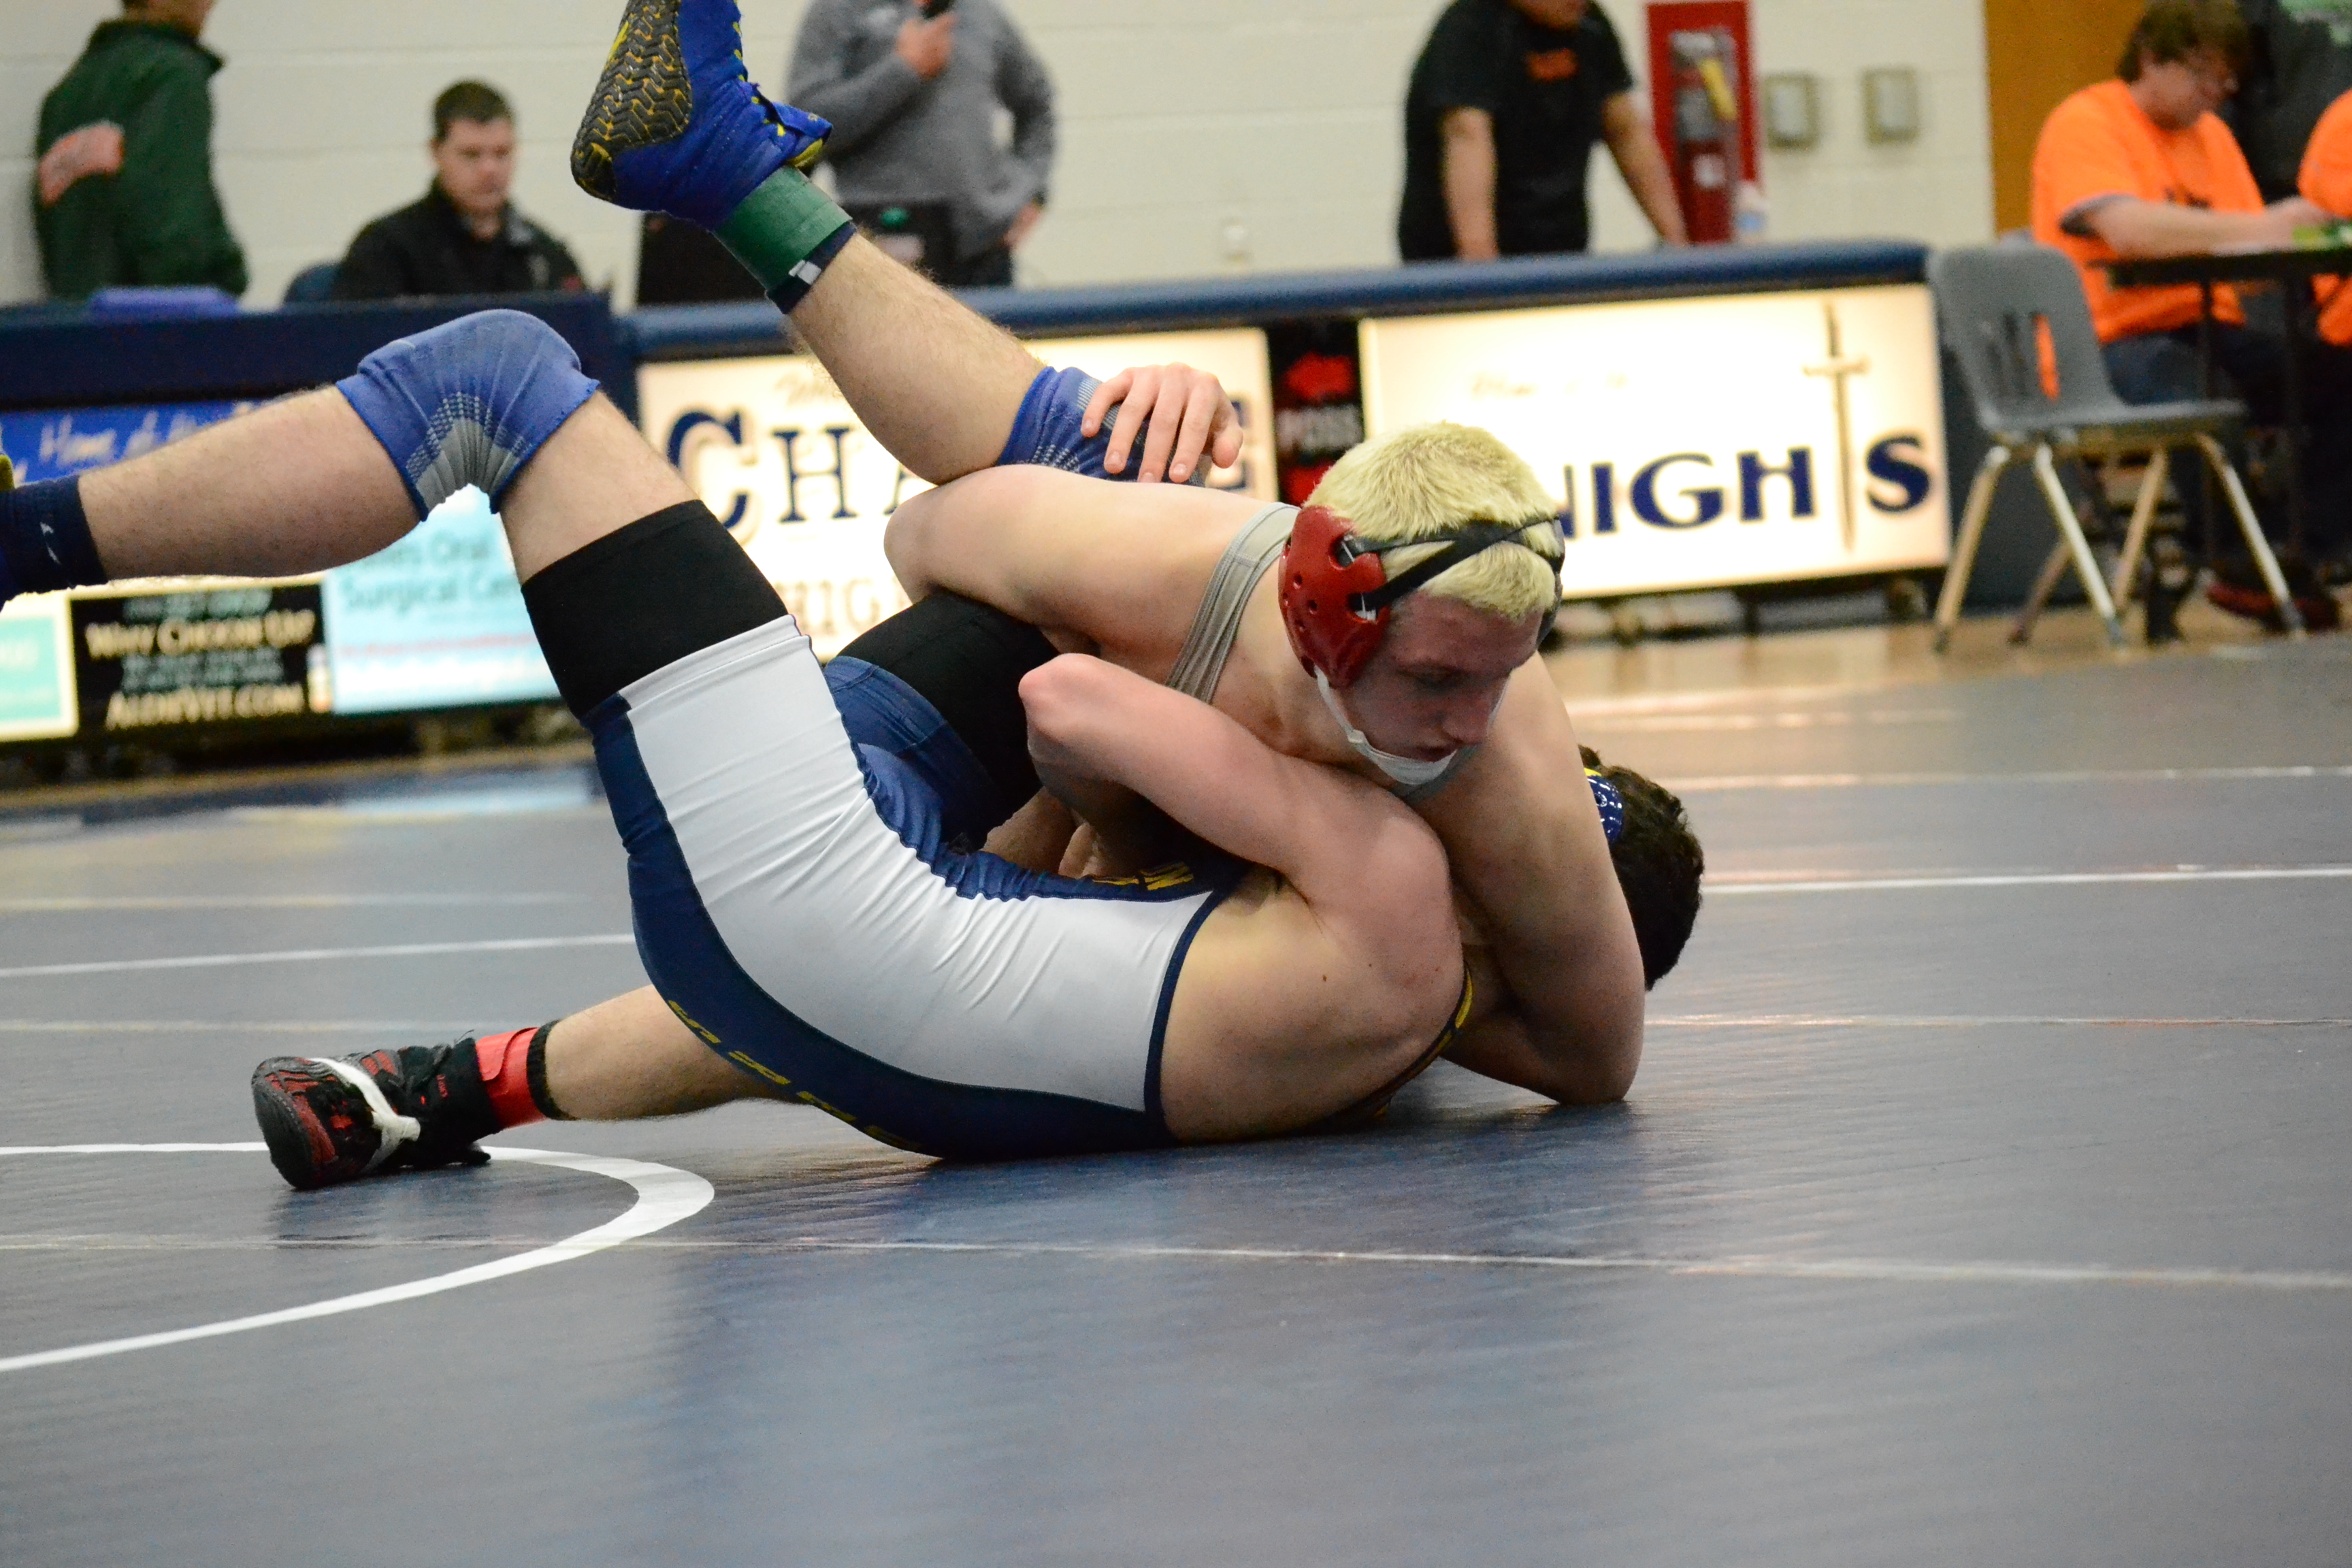 Sophomore Matt Raines pins a Loudoun County wrestler. Raines placed first in the 132-pound weight class and had a 4-0 record throughout the tournament.